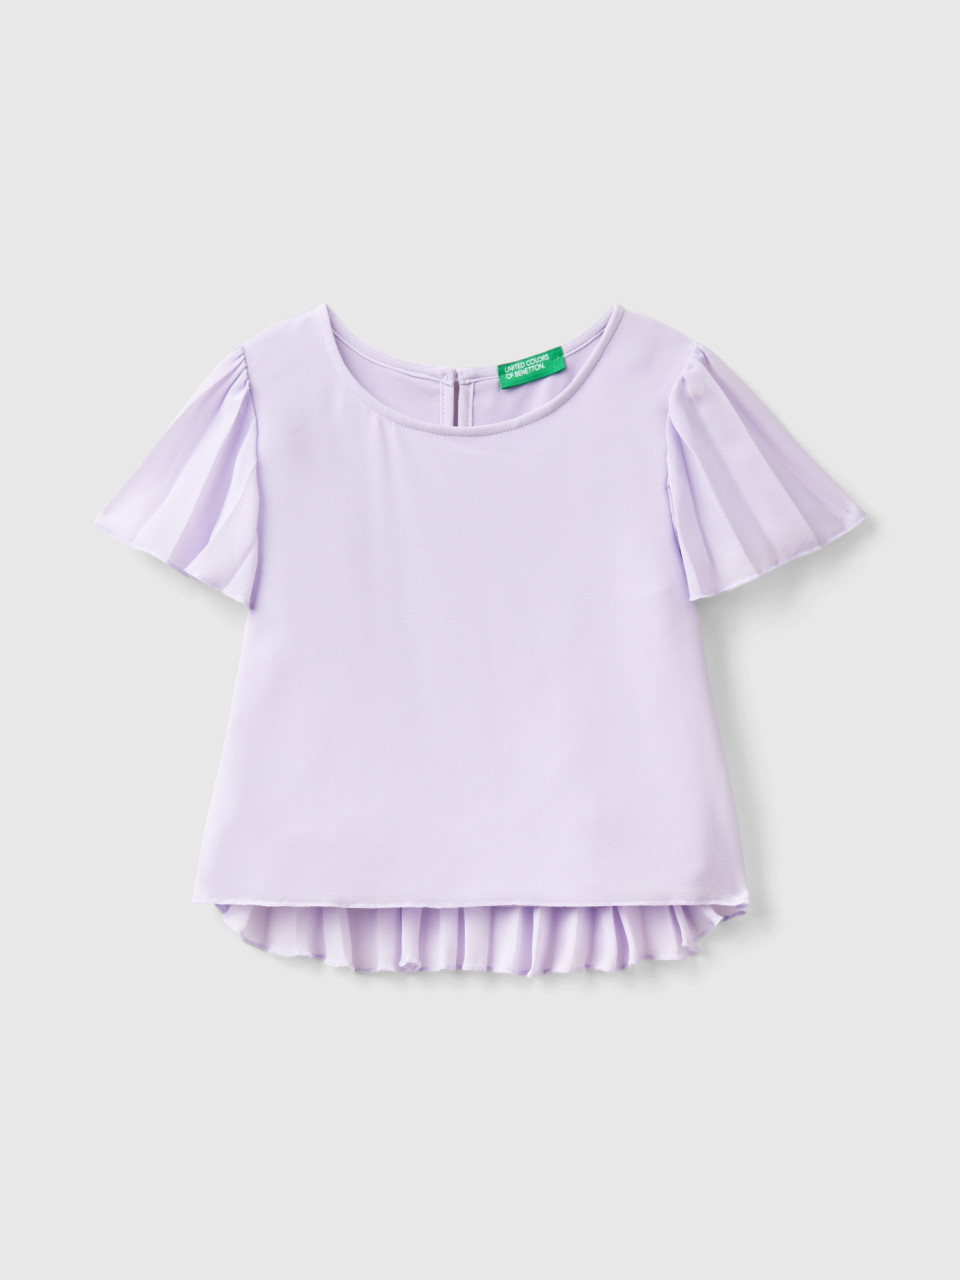 Benetton, Blouse With Pleated Details, Lilac, Kids